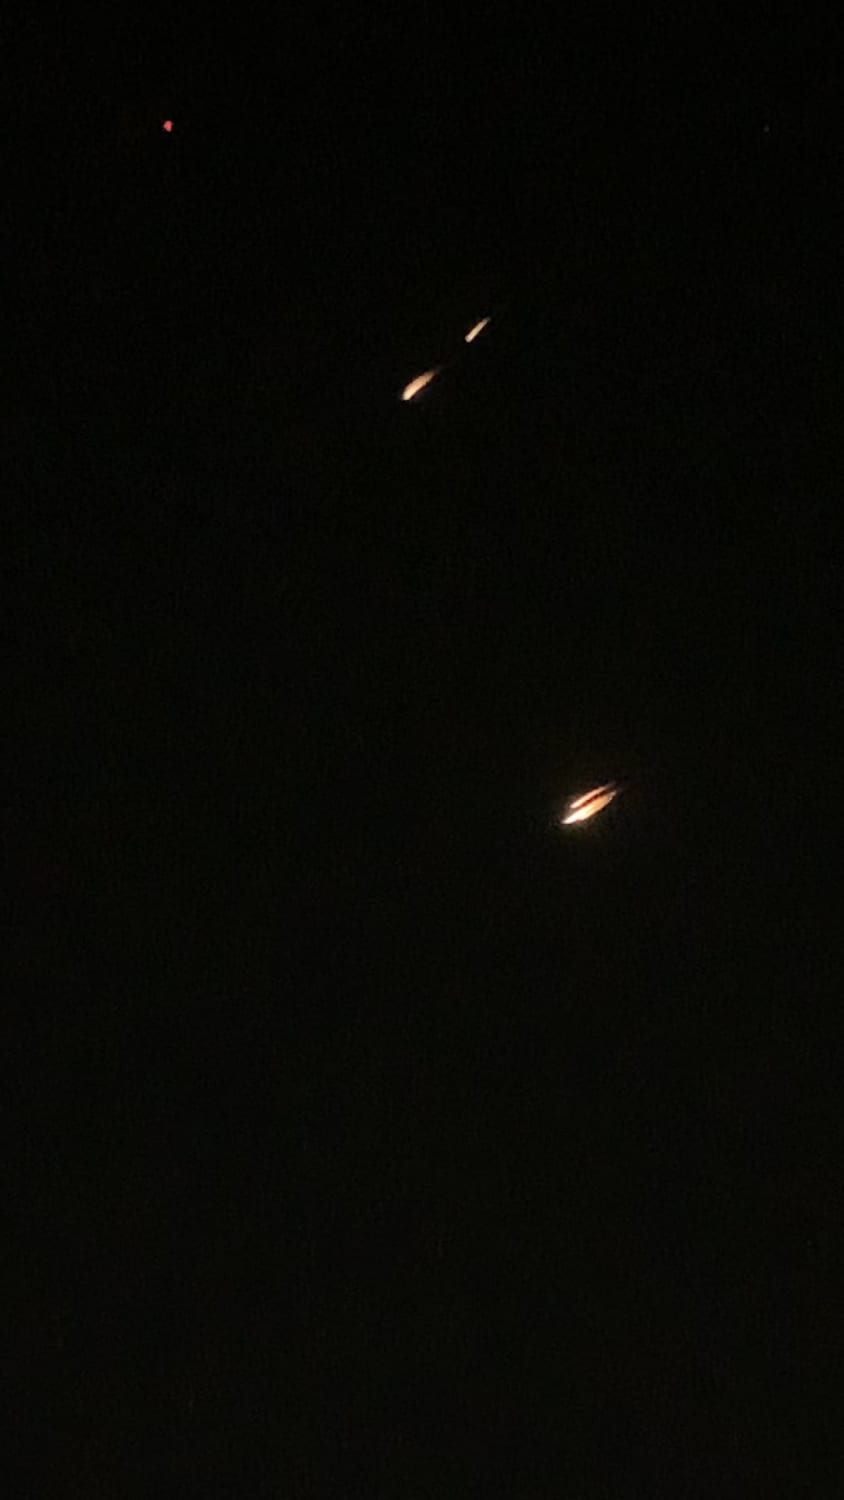 Captured tonight. Thought they were meteors until they paused